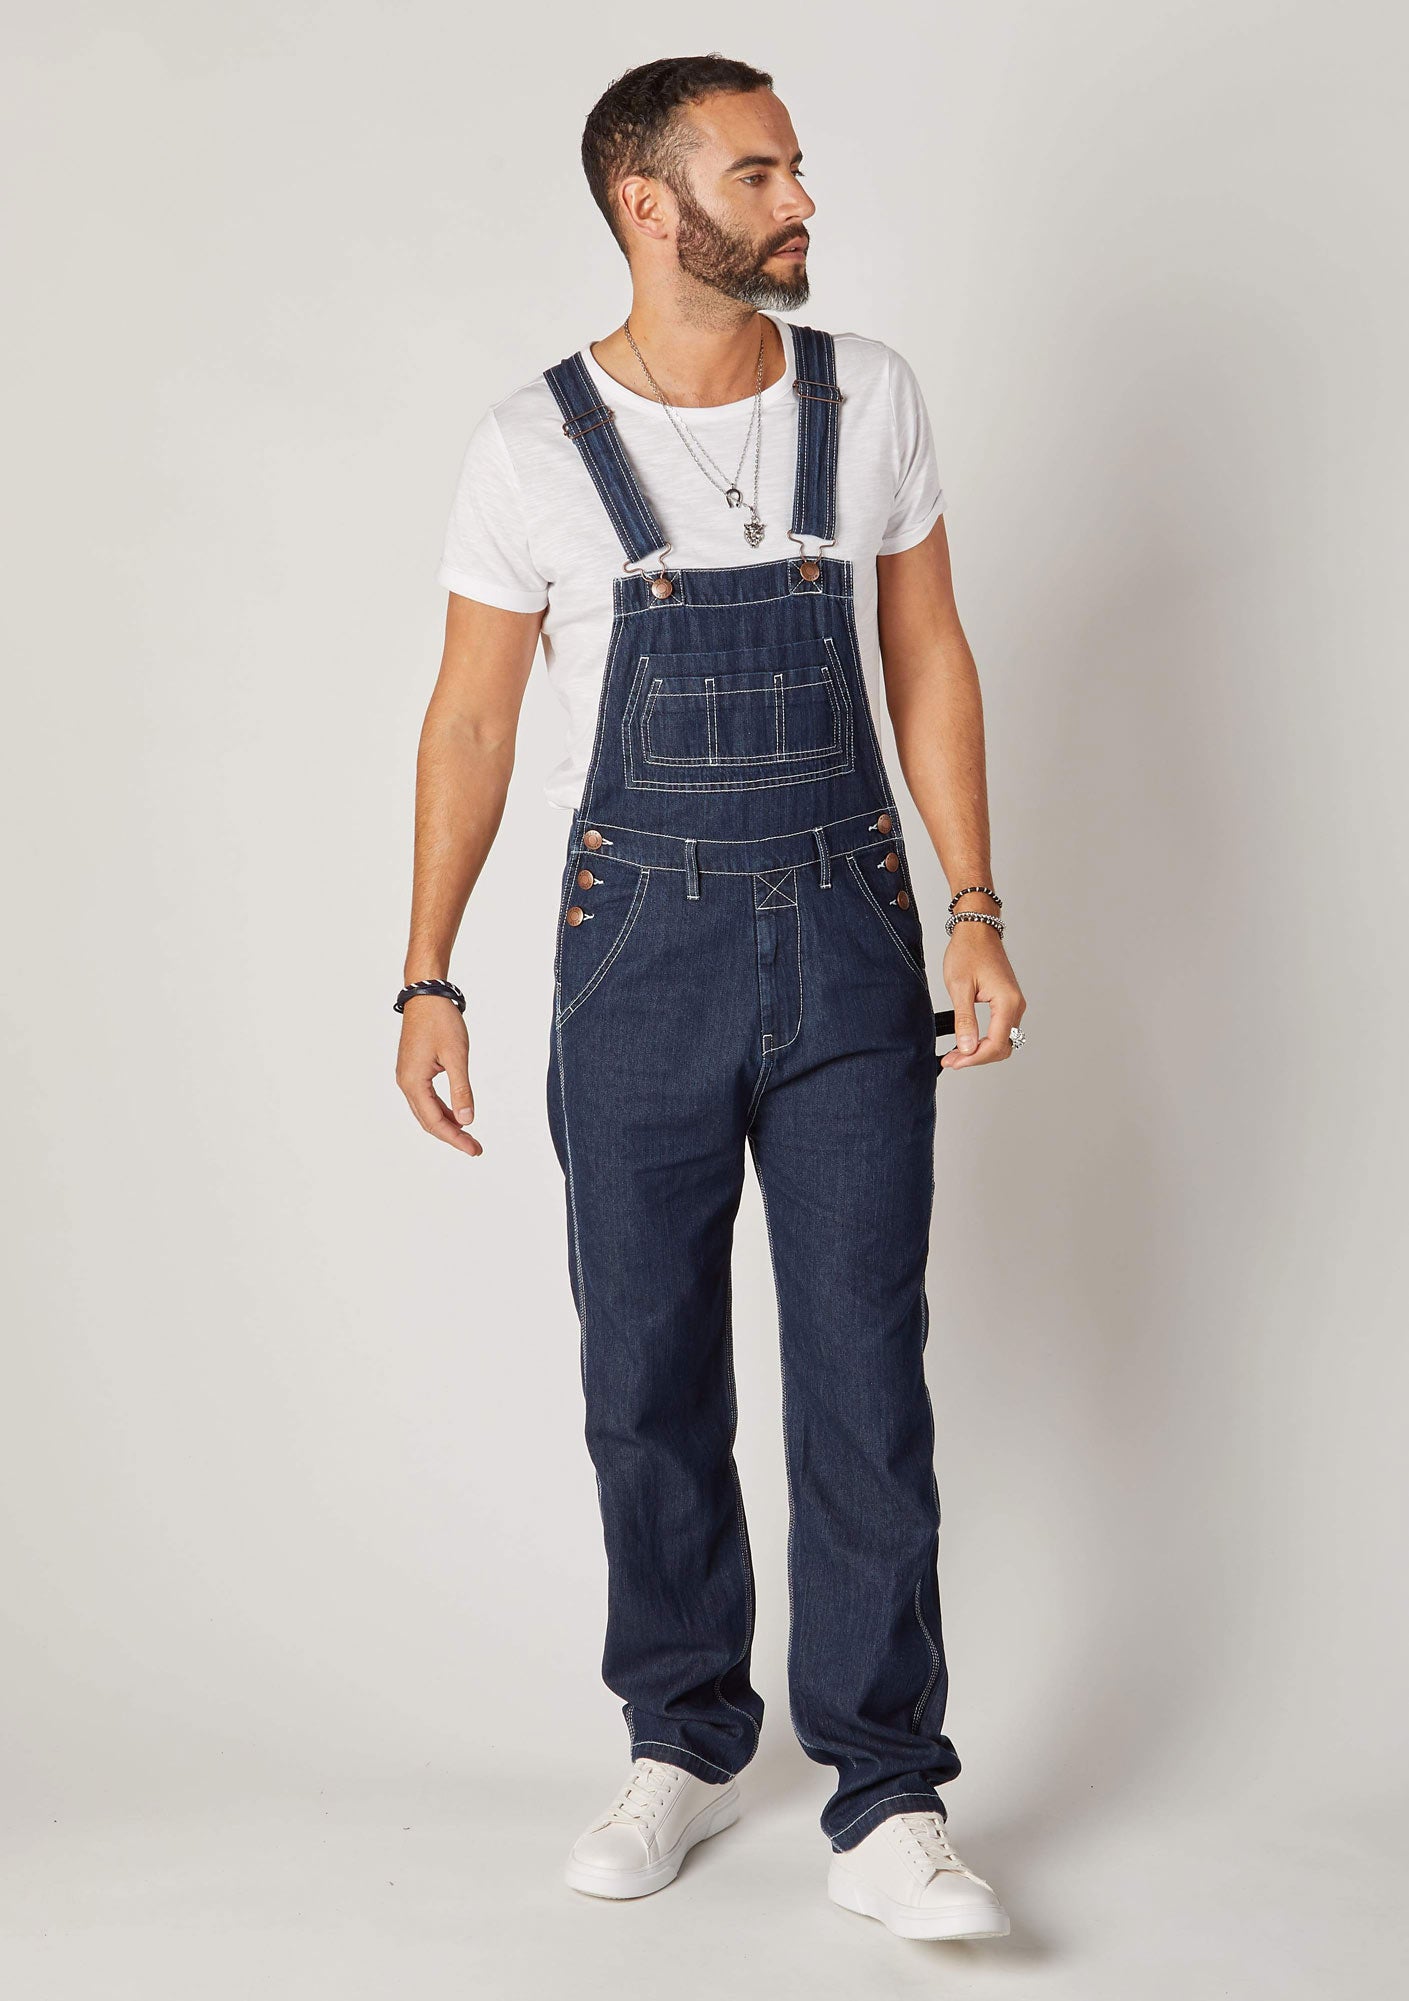 Front pose looking to left wearing loose fitting, dark blue denim bib overalls.